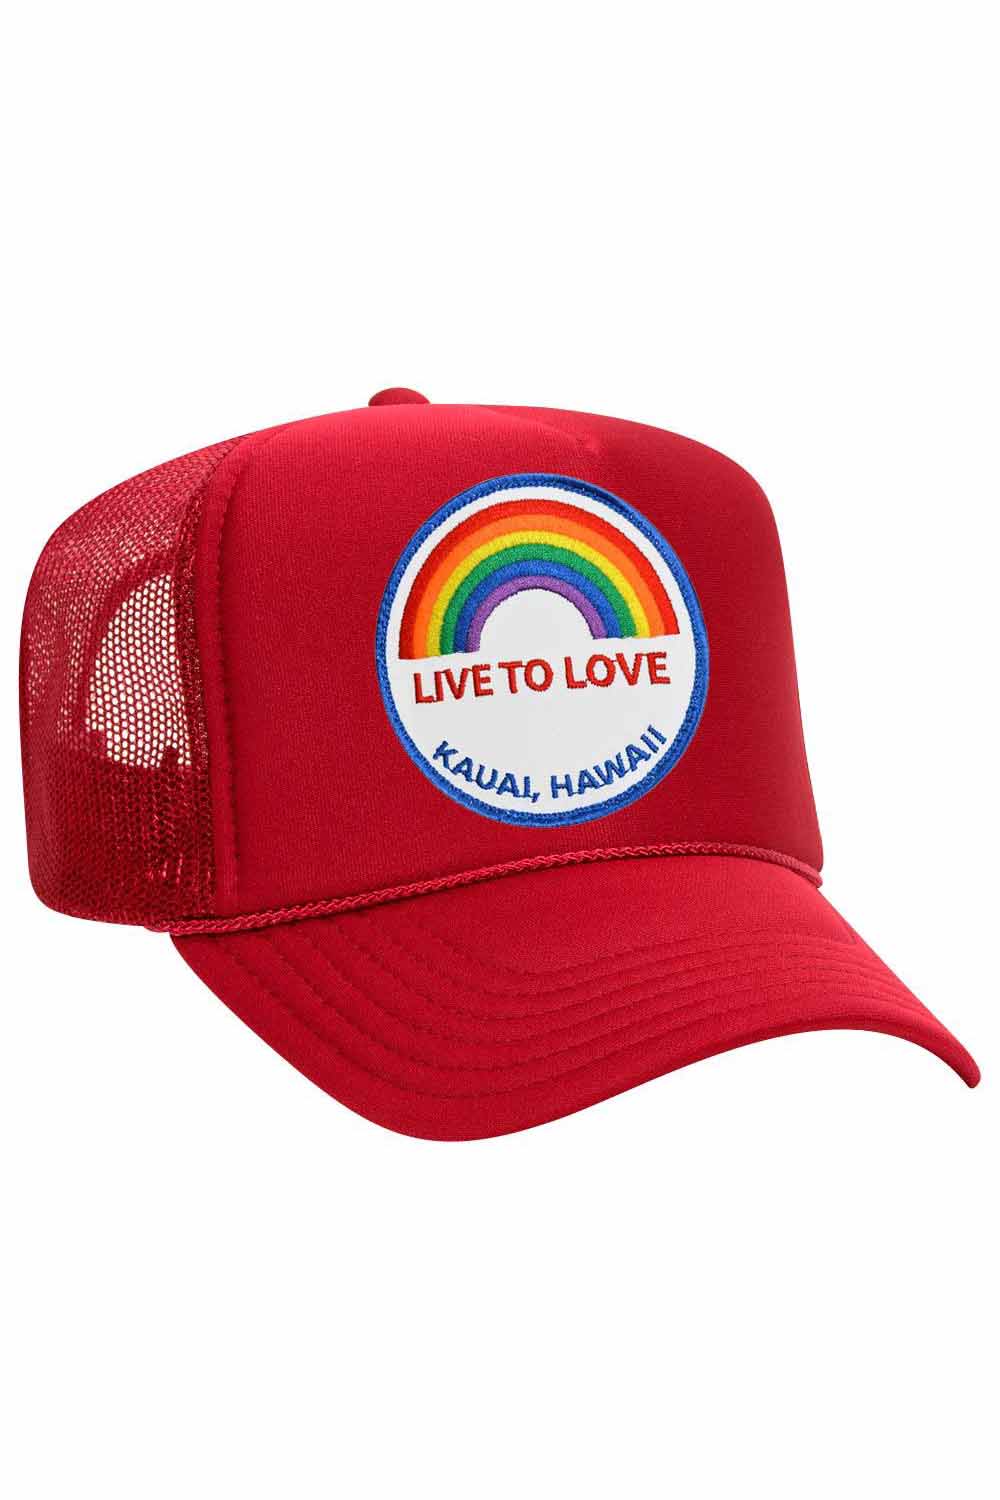 LIVE TO LOVE VINTAGE TRUCKER HAT HATS Aviator Nation RED 